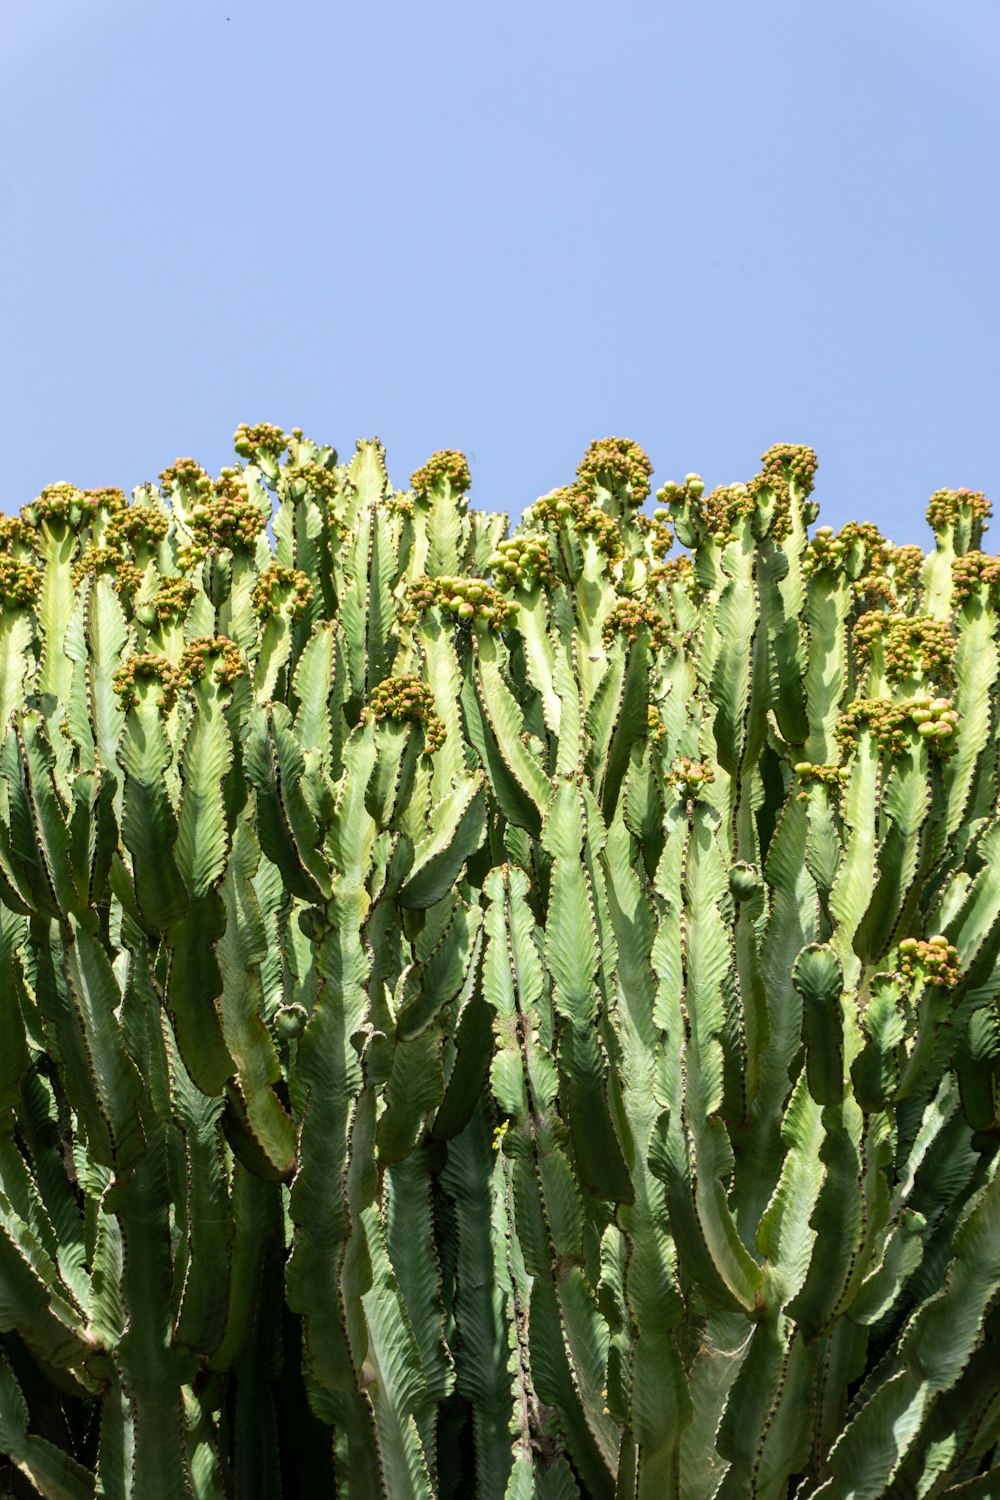 a large group of green cactus plants with a blue sky in the background